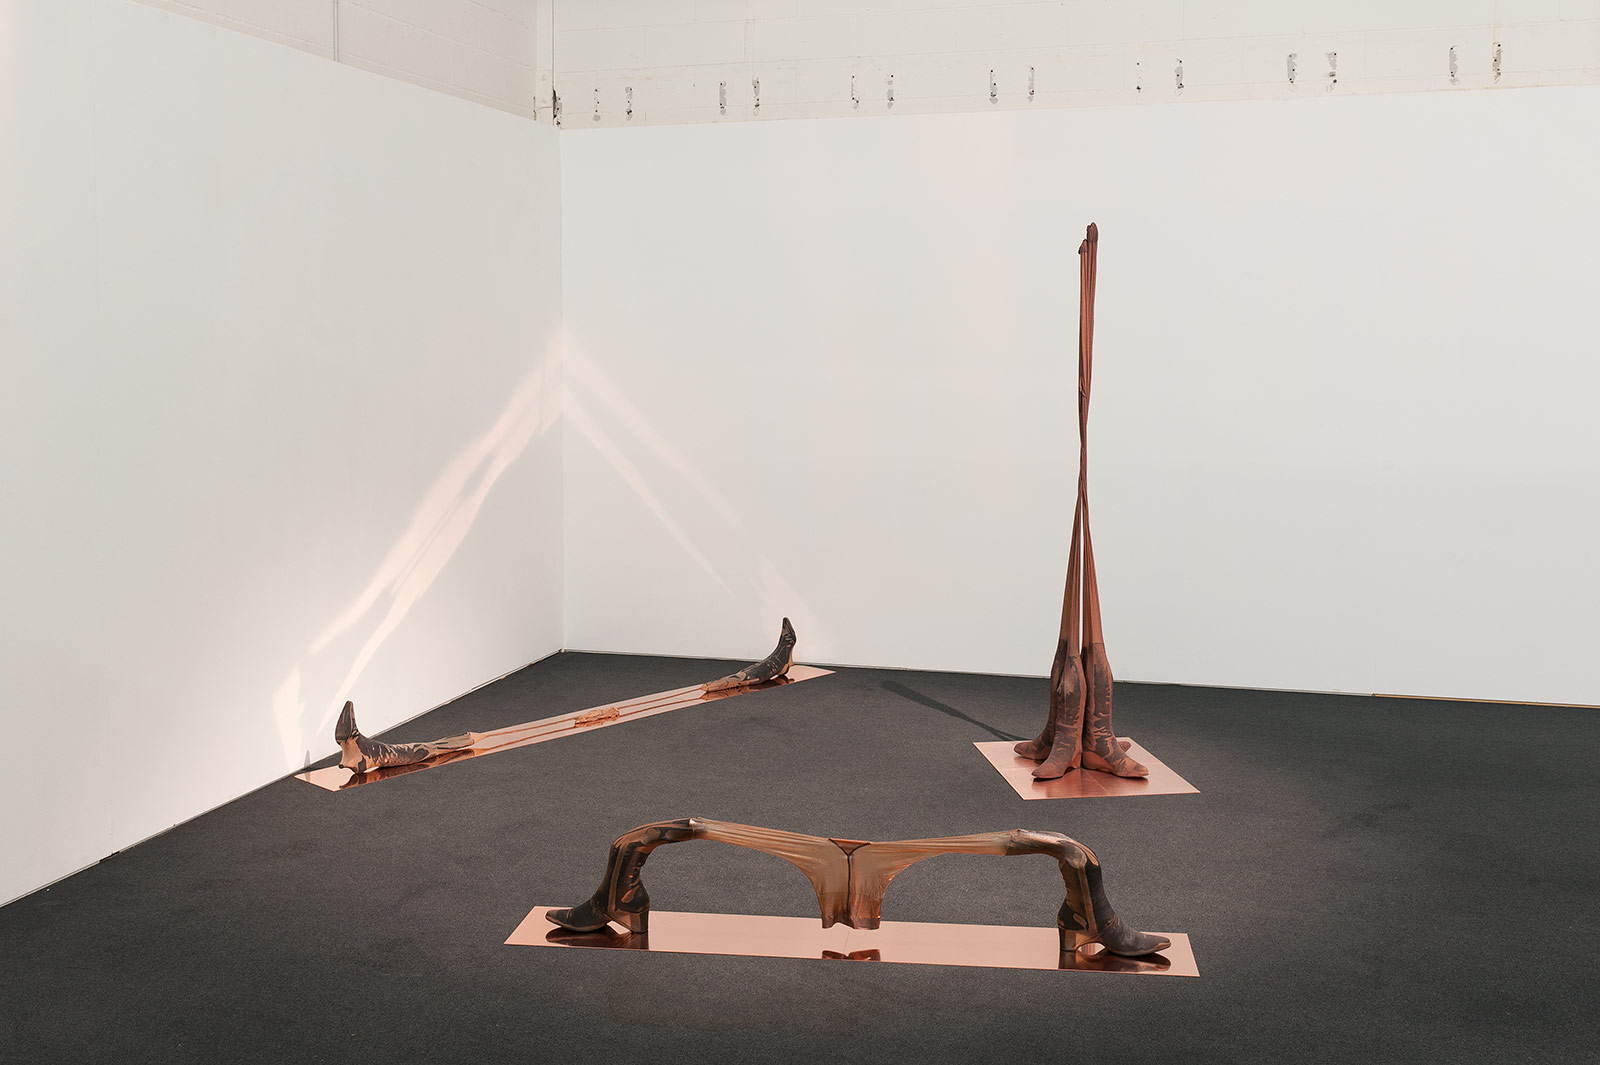 Installation view of three sculptures made of tights and epoxy resin on copper plates